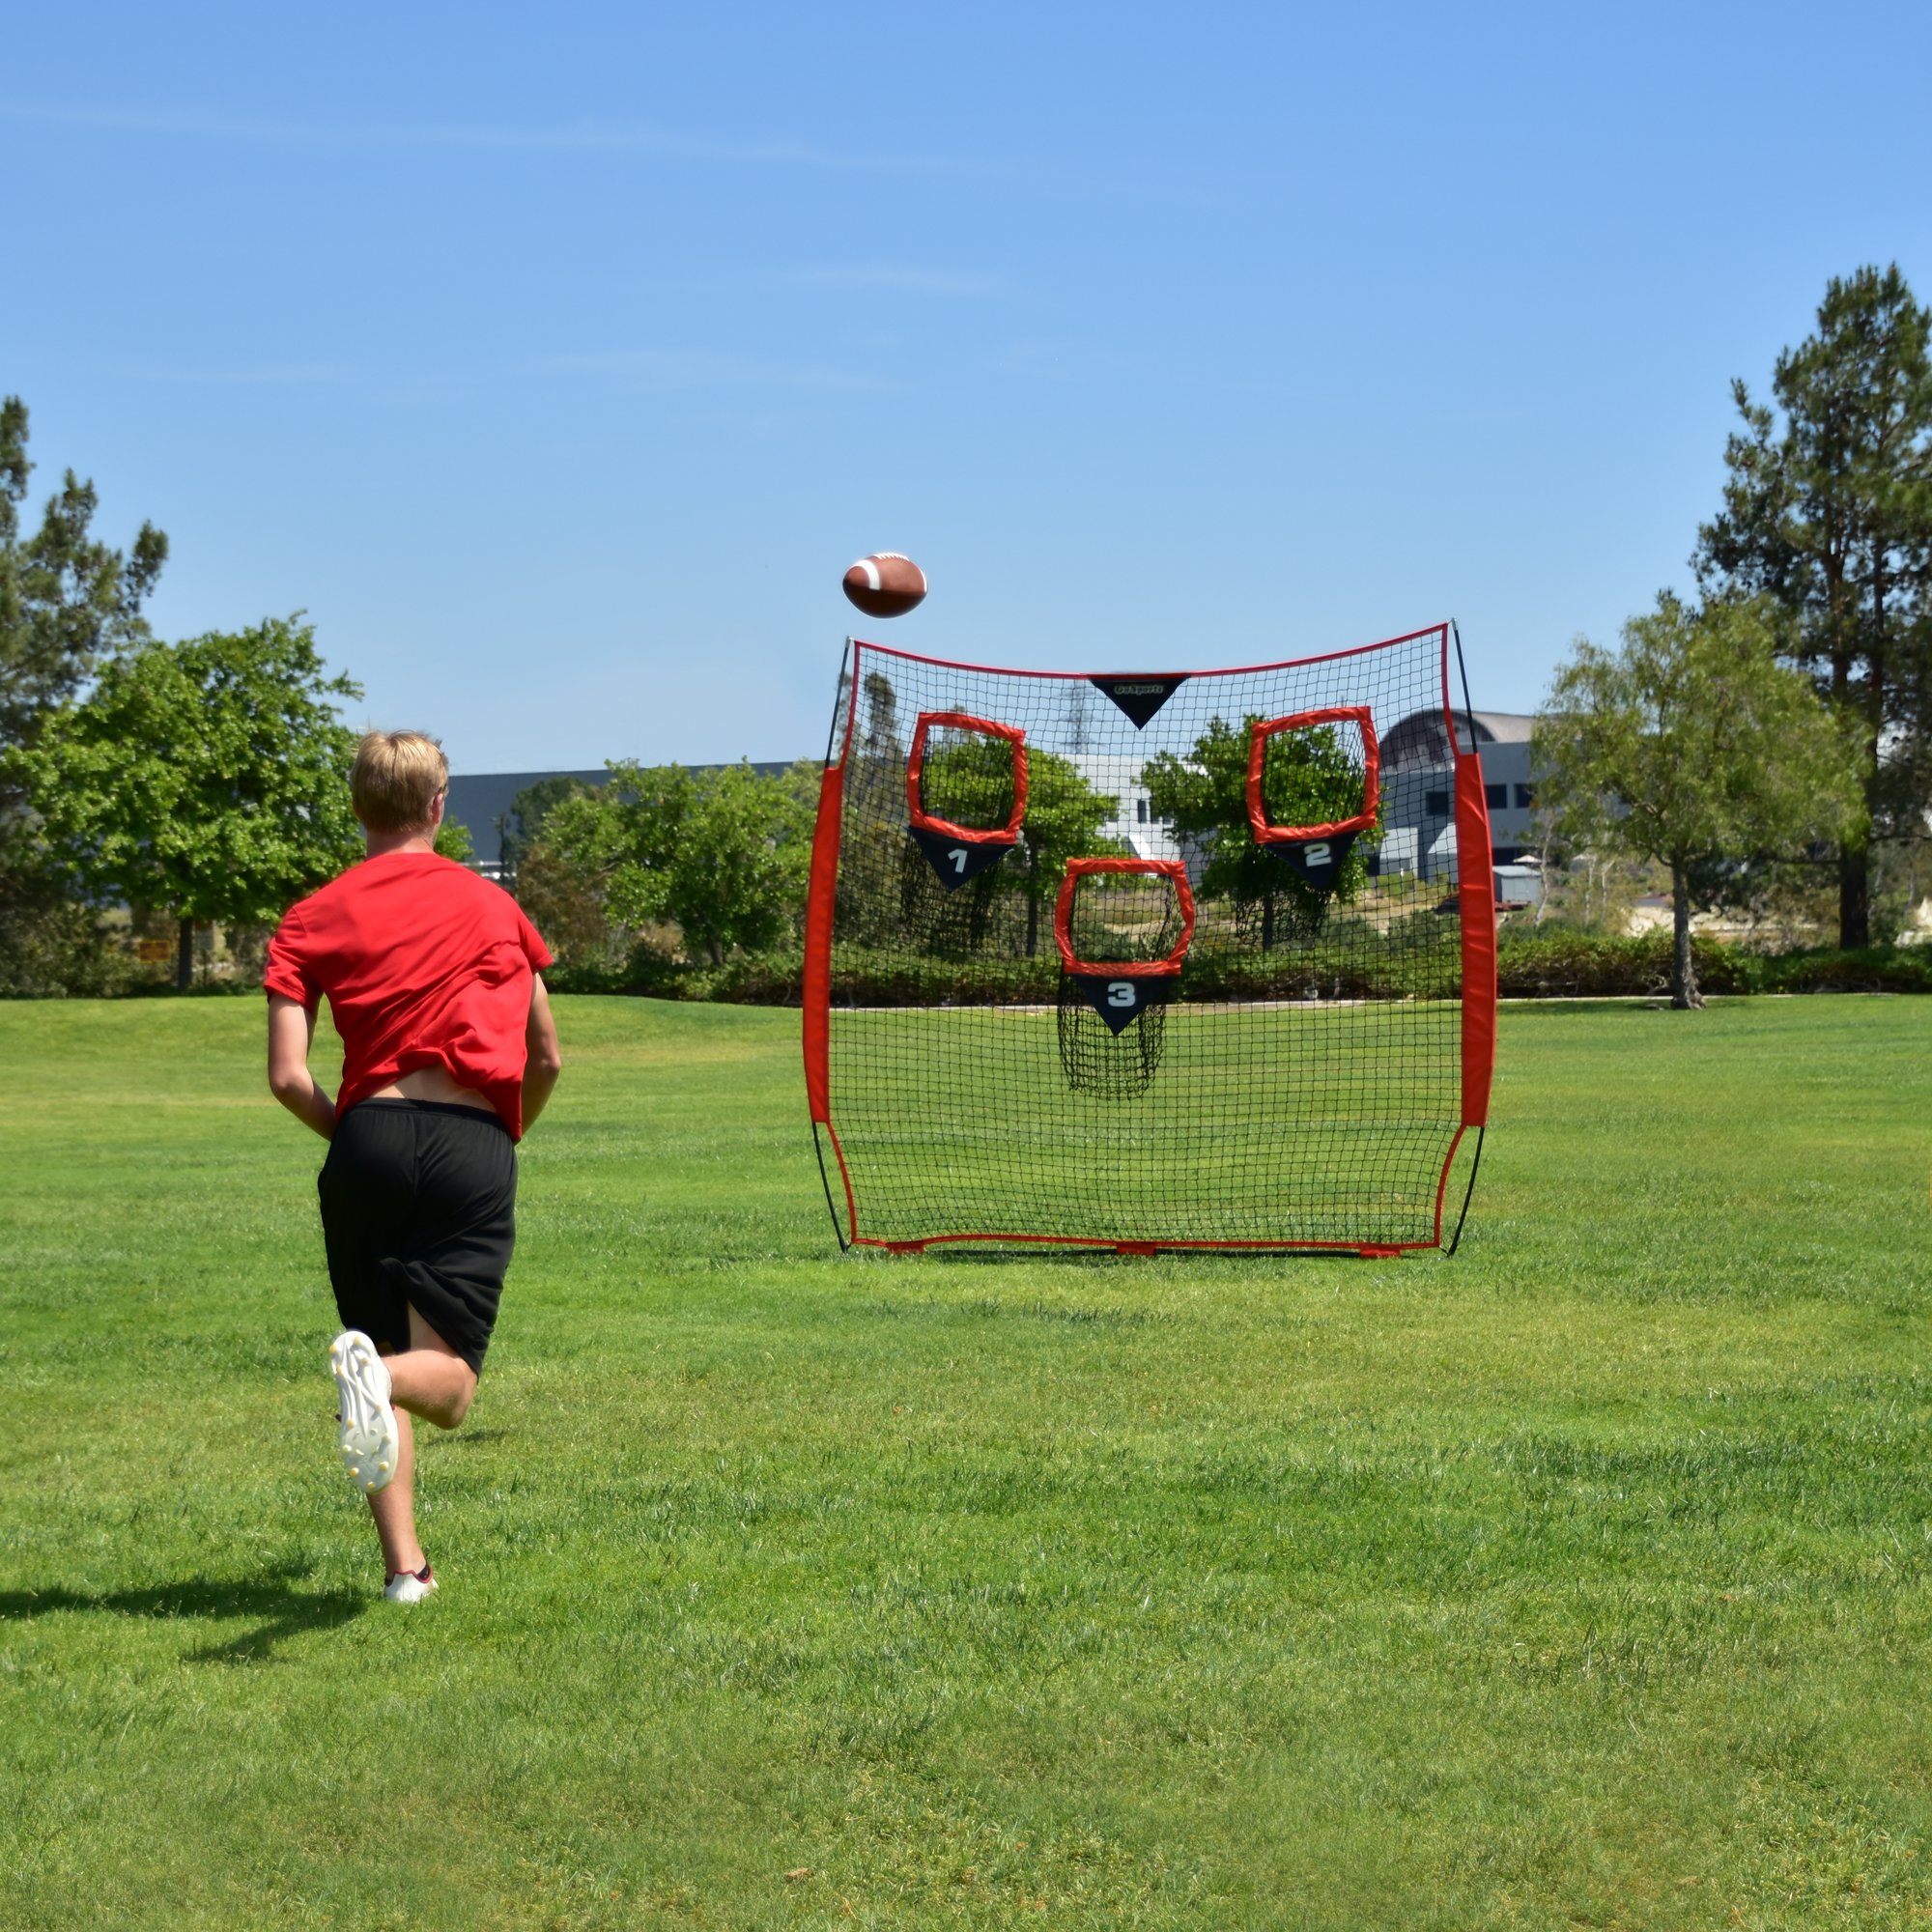 GoSports Football Trainer Throwing Net - Choose Between 8 ft x 8 ft or 6 ft x 6 ft Nets - Improve QB Throwing Accuracy - Includes Foldable Bow Frame and Portable Carry Case